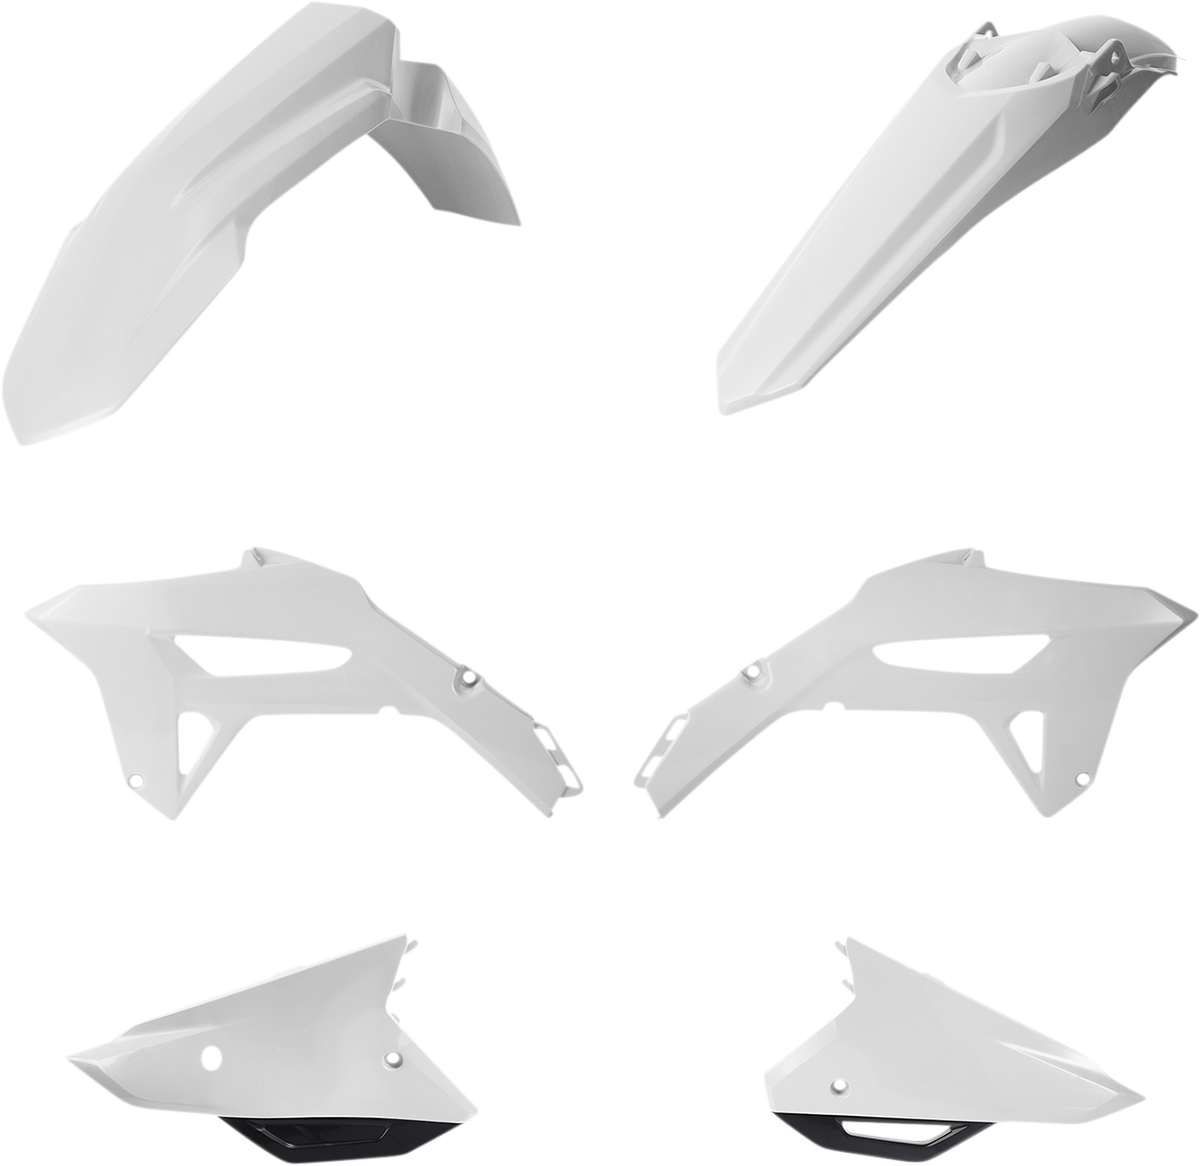 ACERBIS Standard Replacement Body Kit - White 2858910002